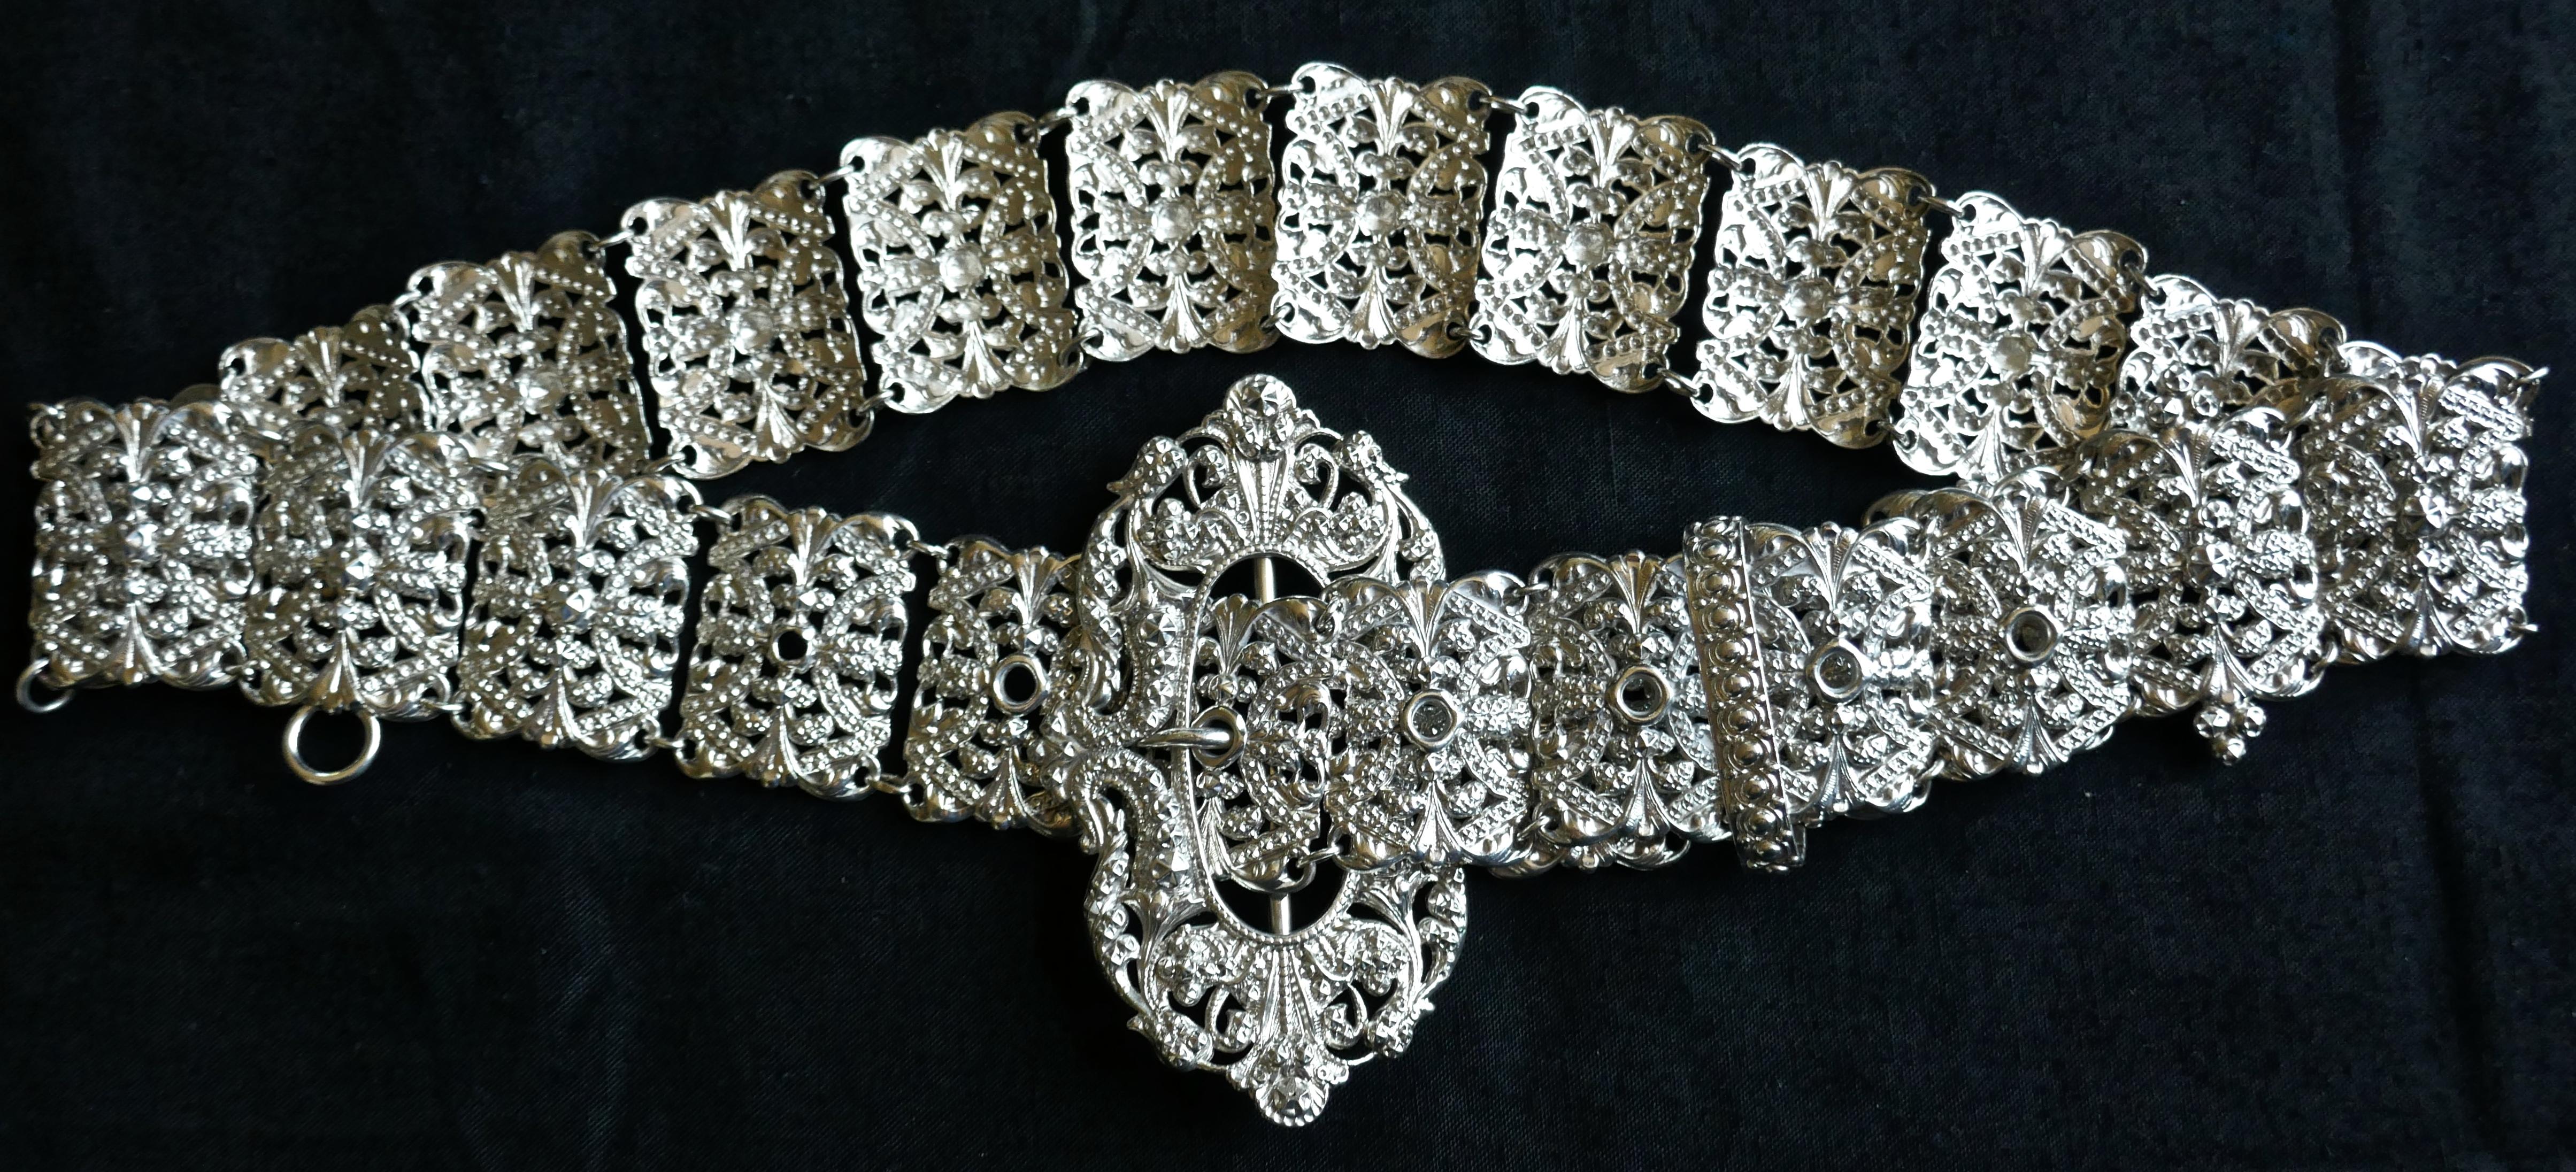 French Arts and Crafts Silver Belt, Articulated Links with Chatelaine Ring In Good Condition For Sale In Chillerton, Isle of Wight